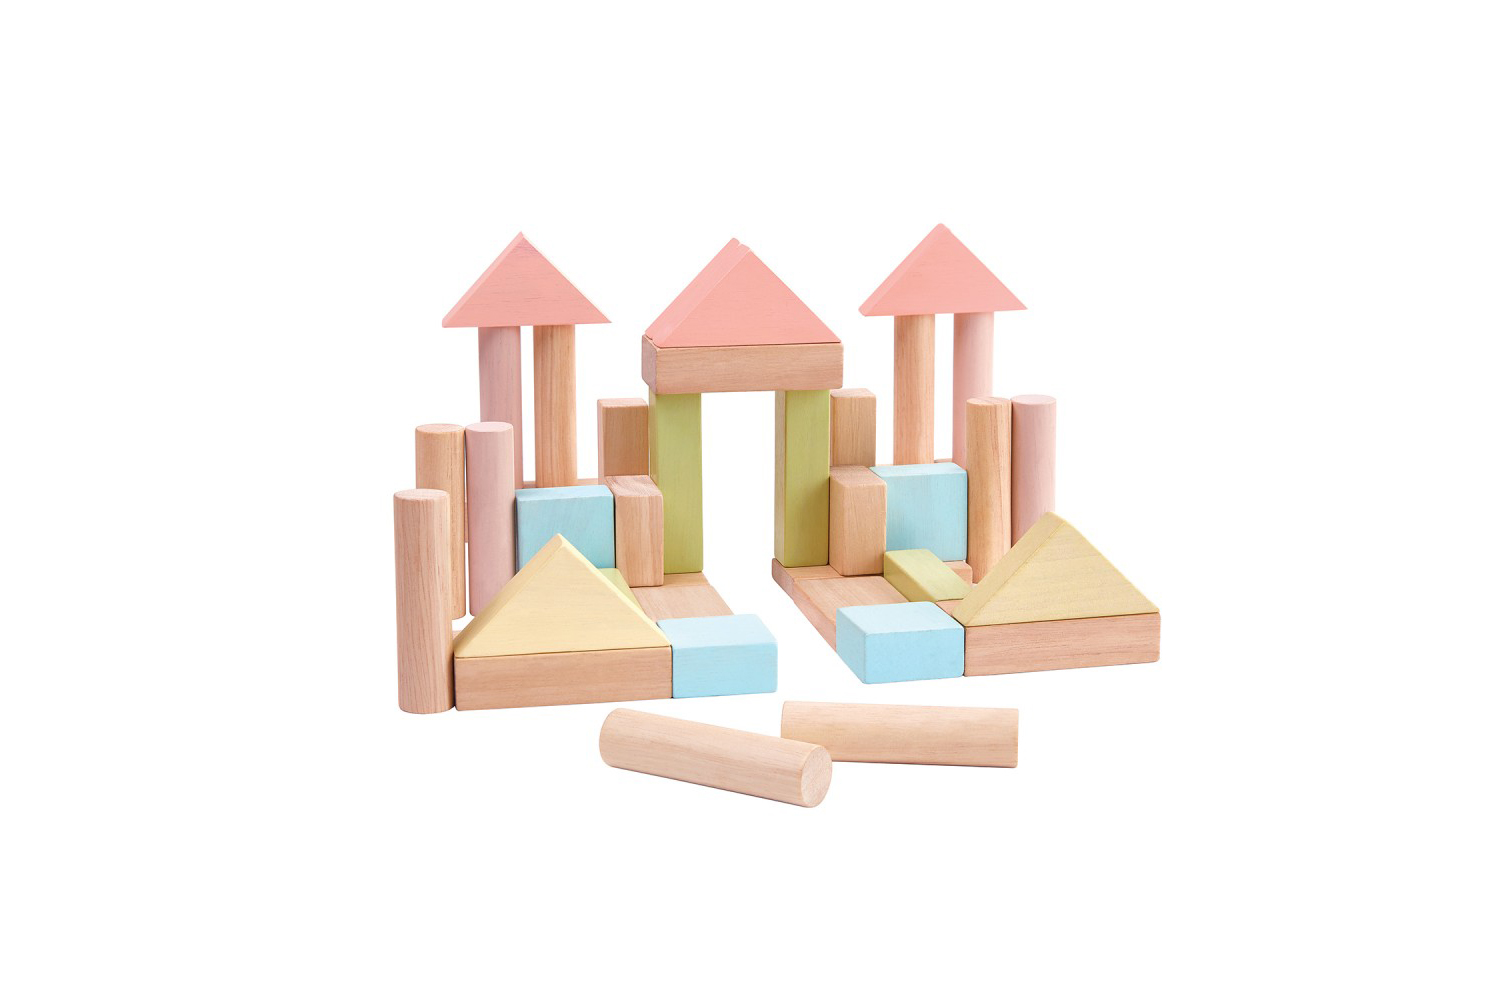  A great toy for kid’s imagination! 40 Unit Blocks from  Plan Toys . 